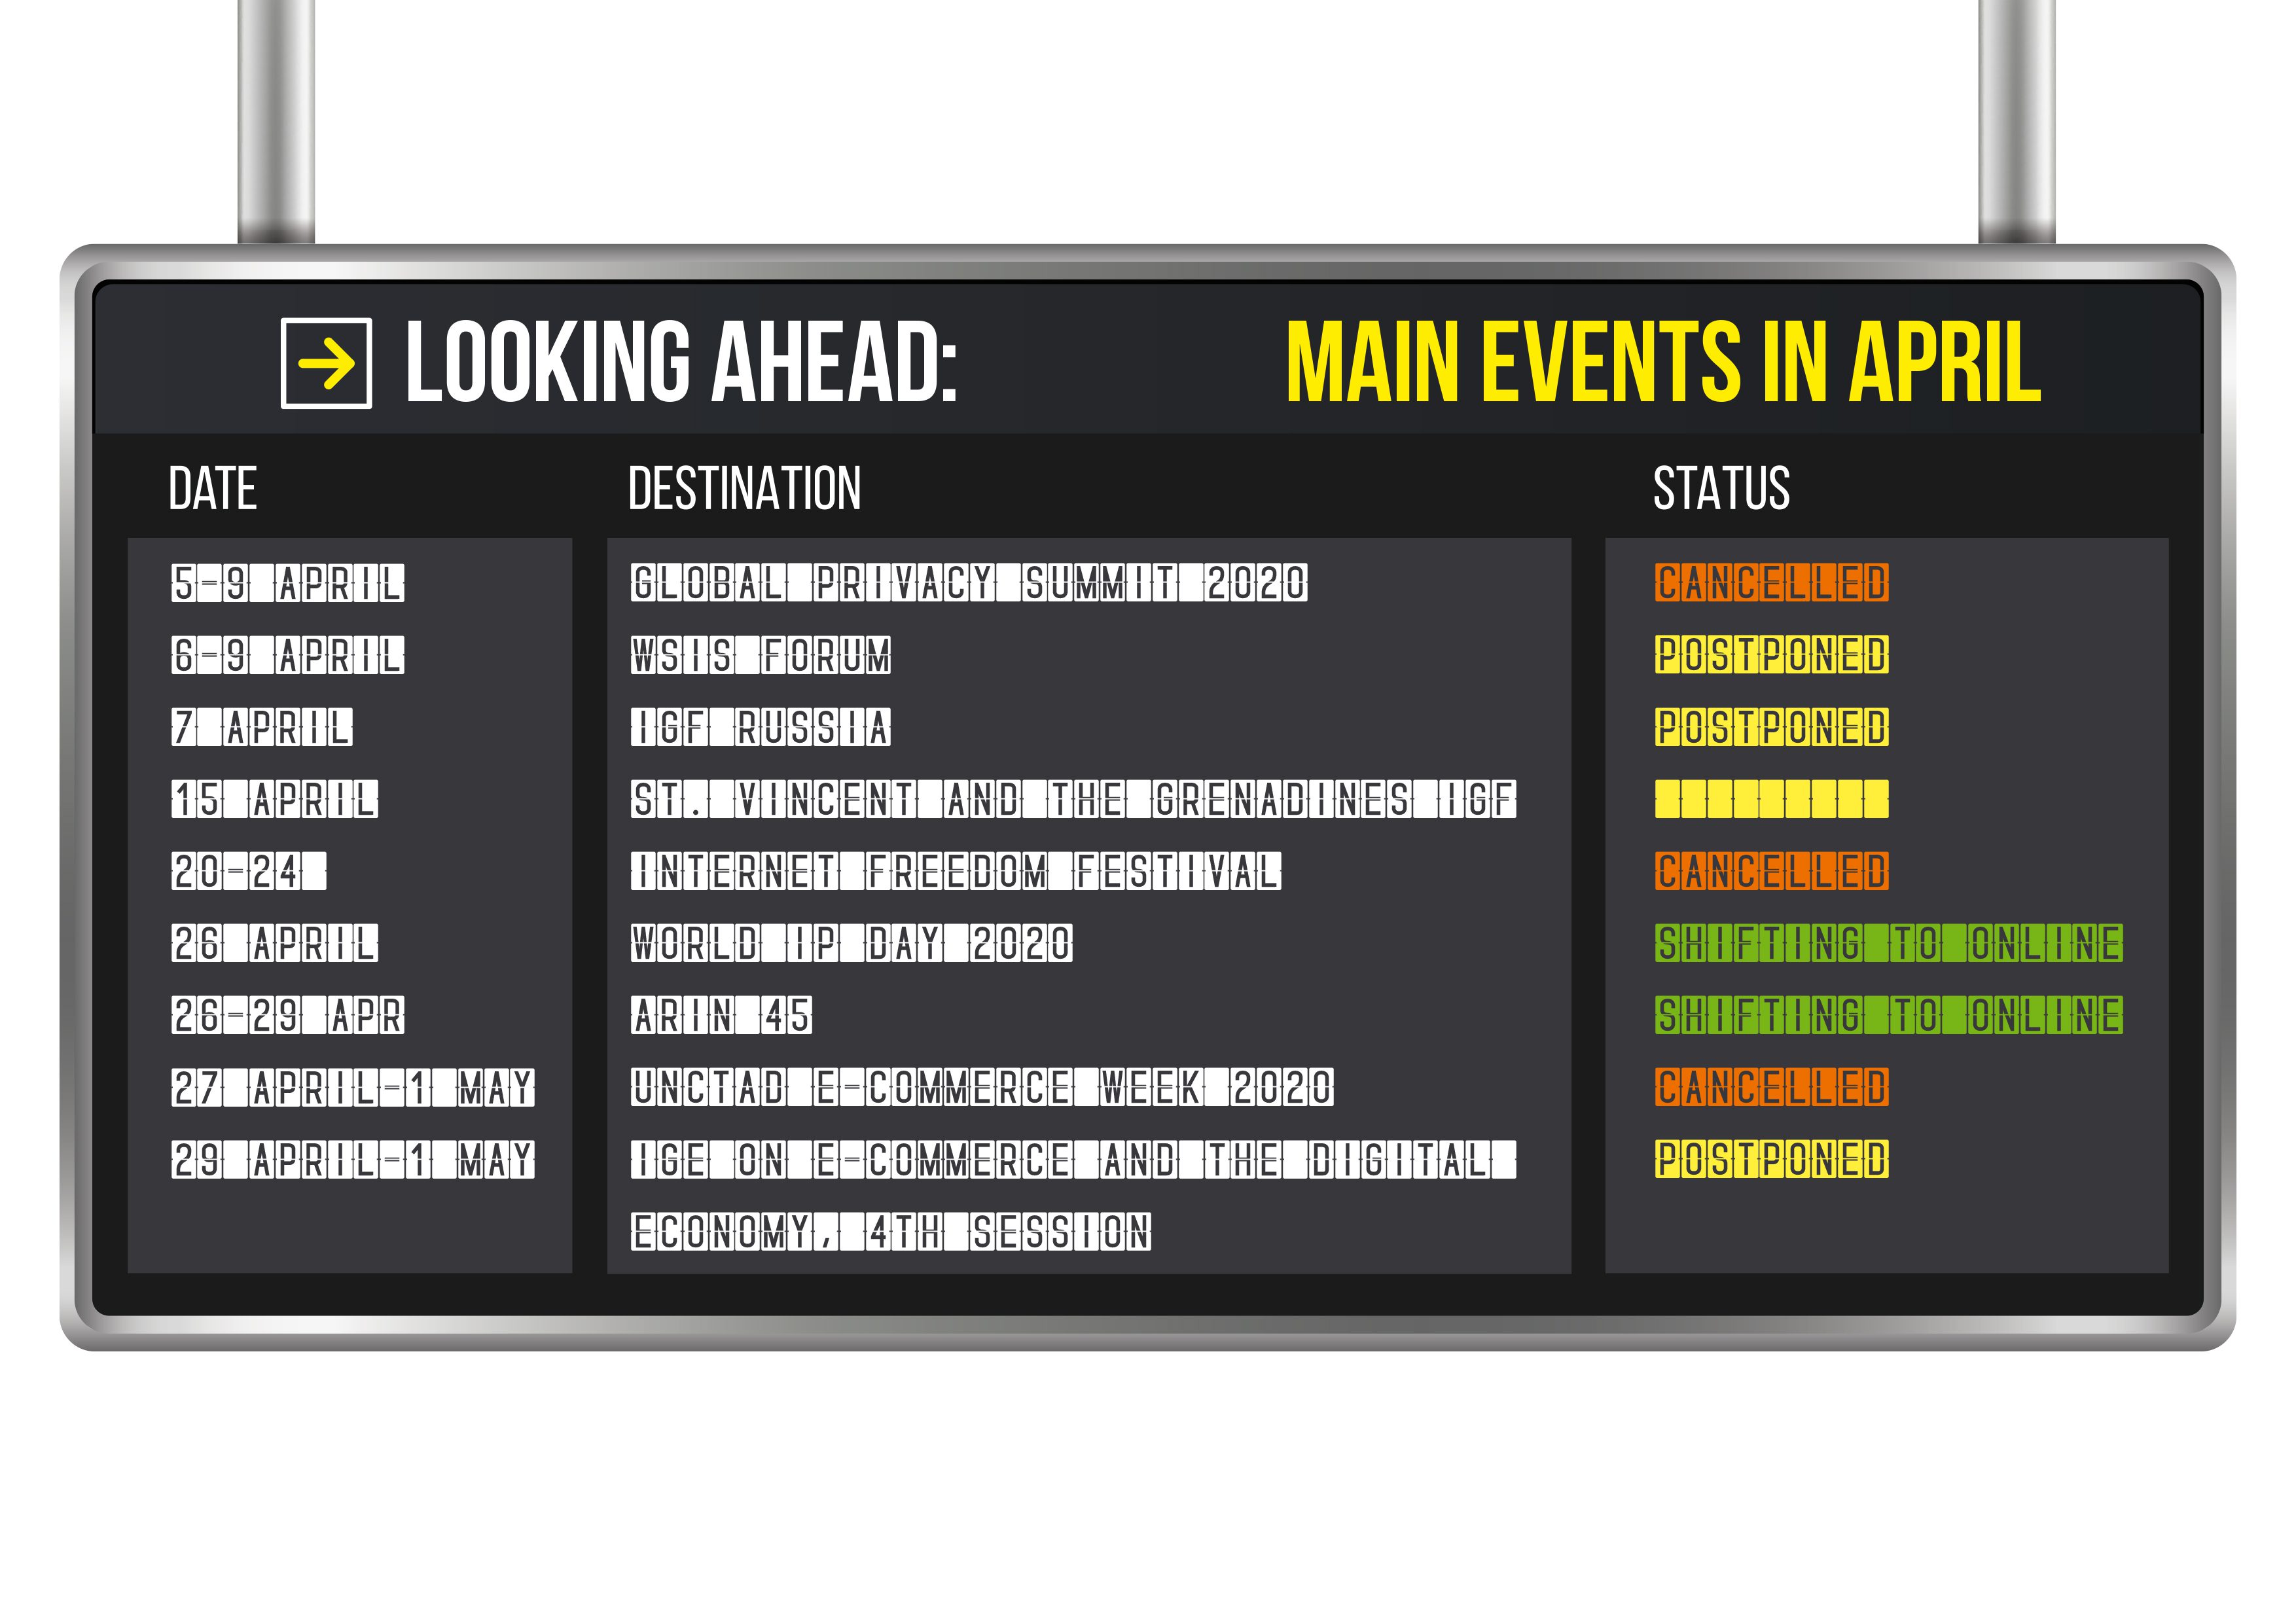 Events in April 2020